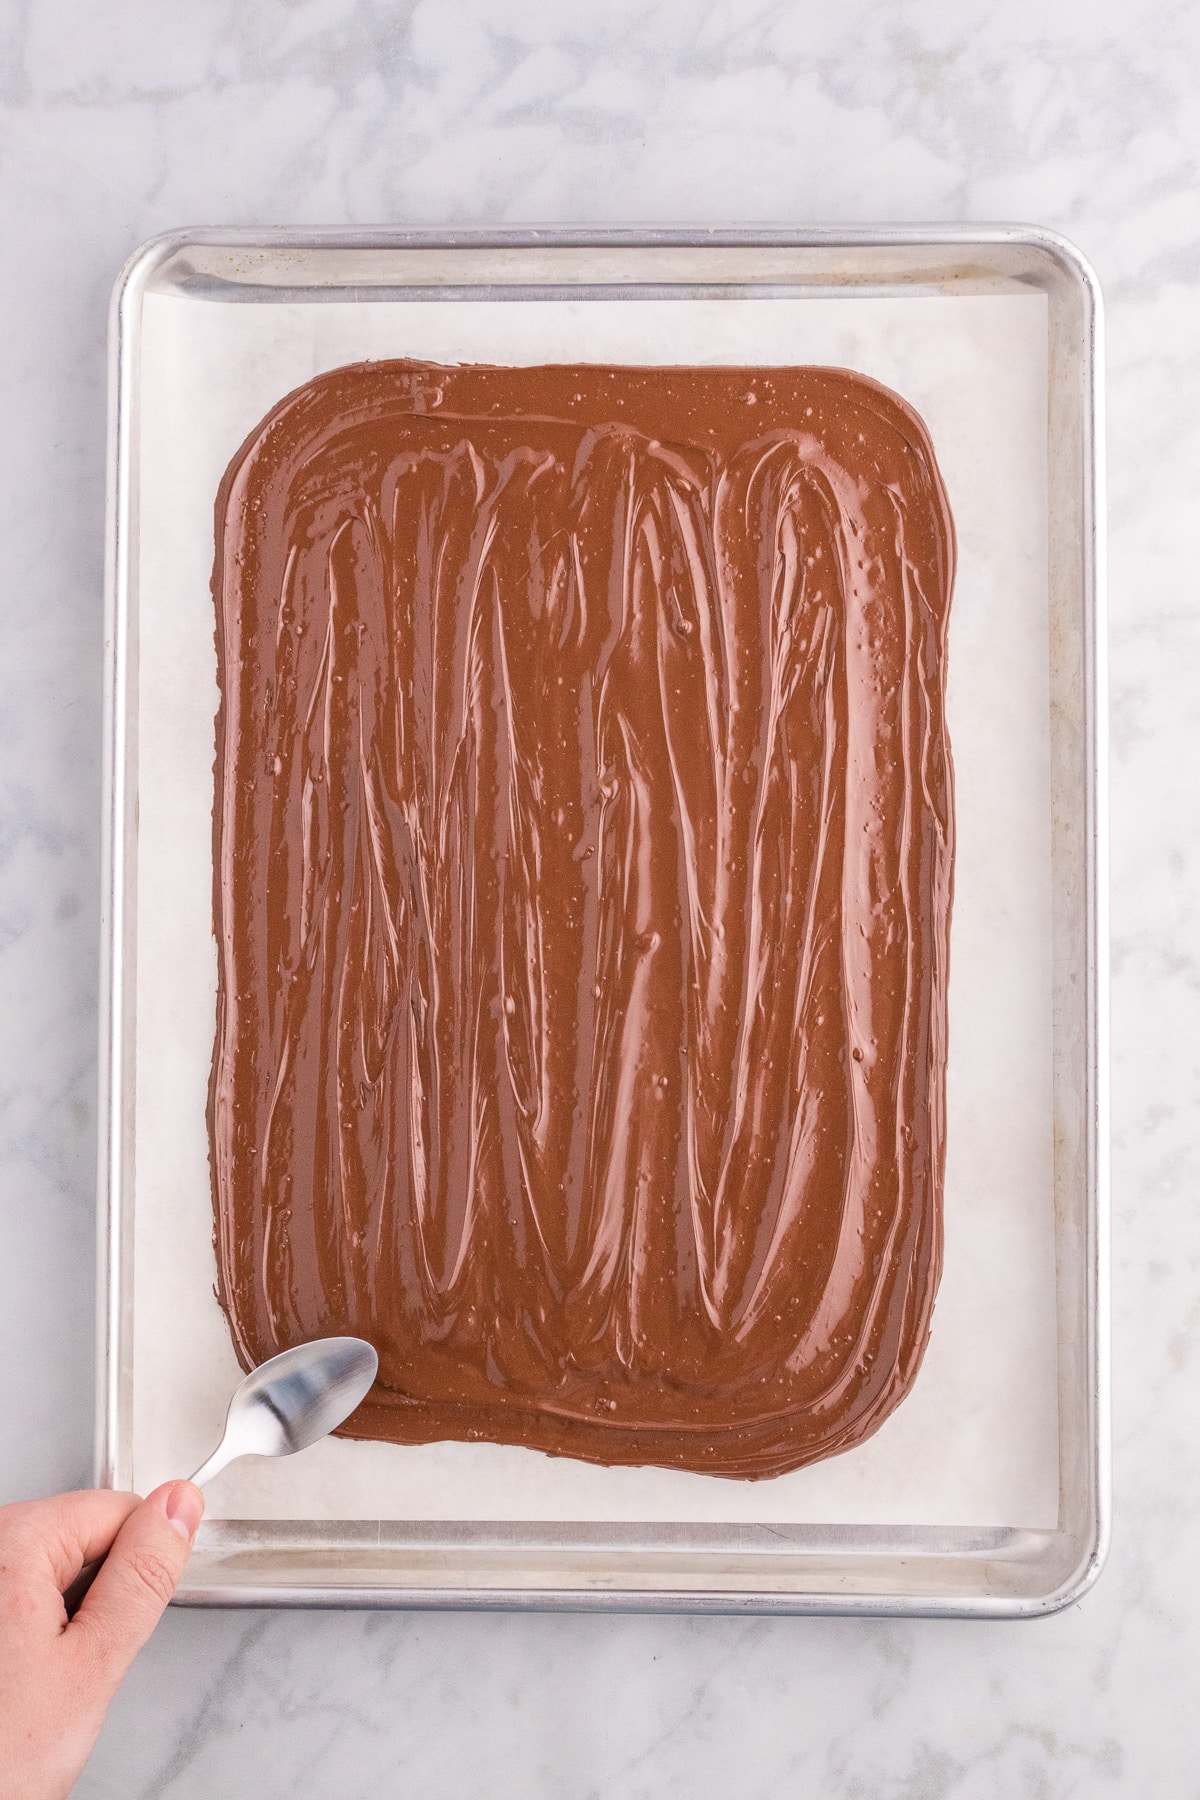 A hand spreading melted chocolate on a baking sheet with a spoon.